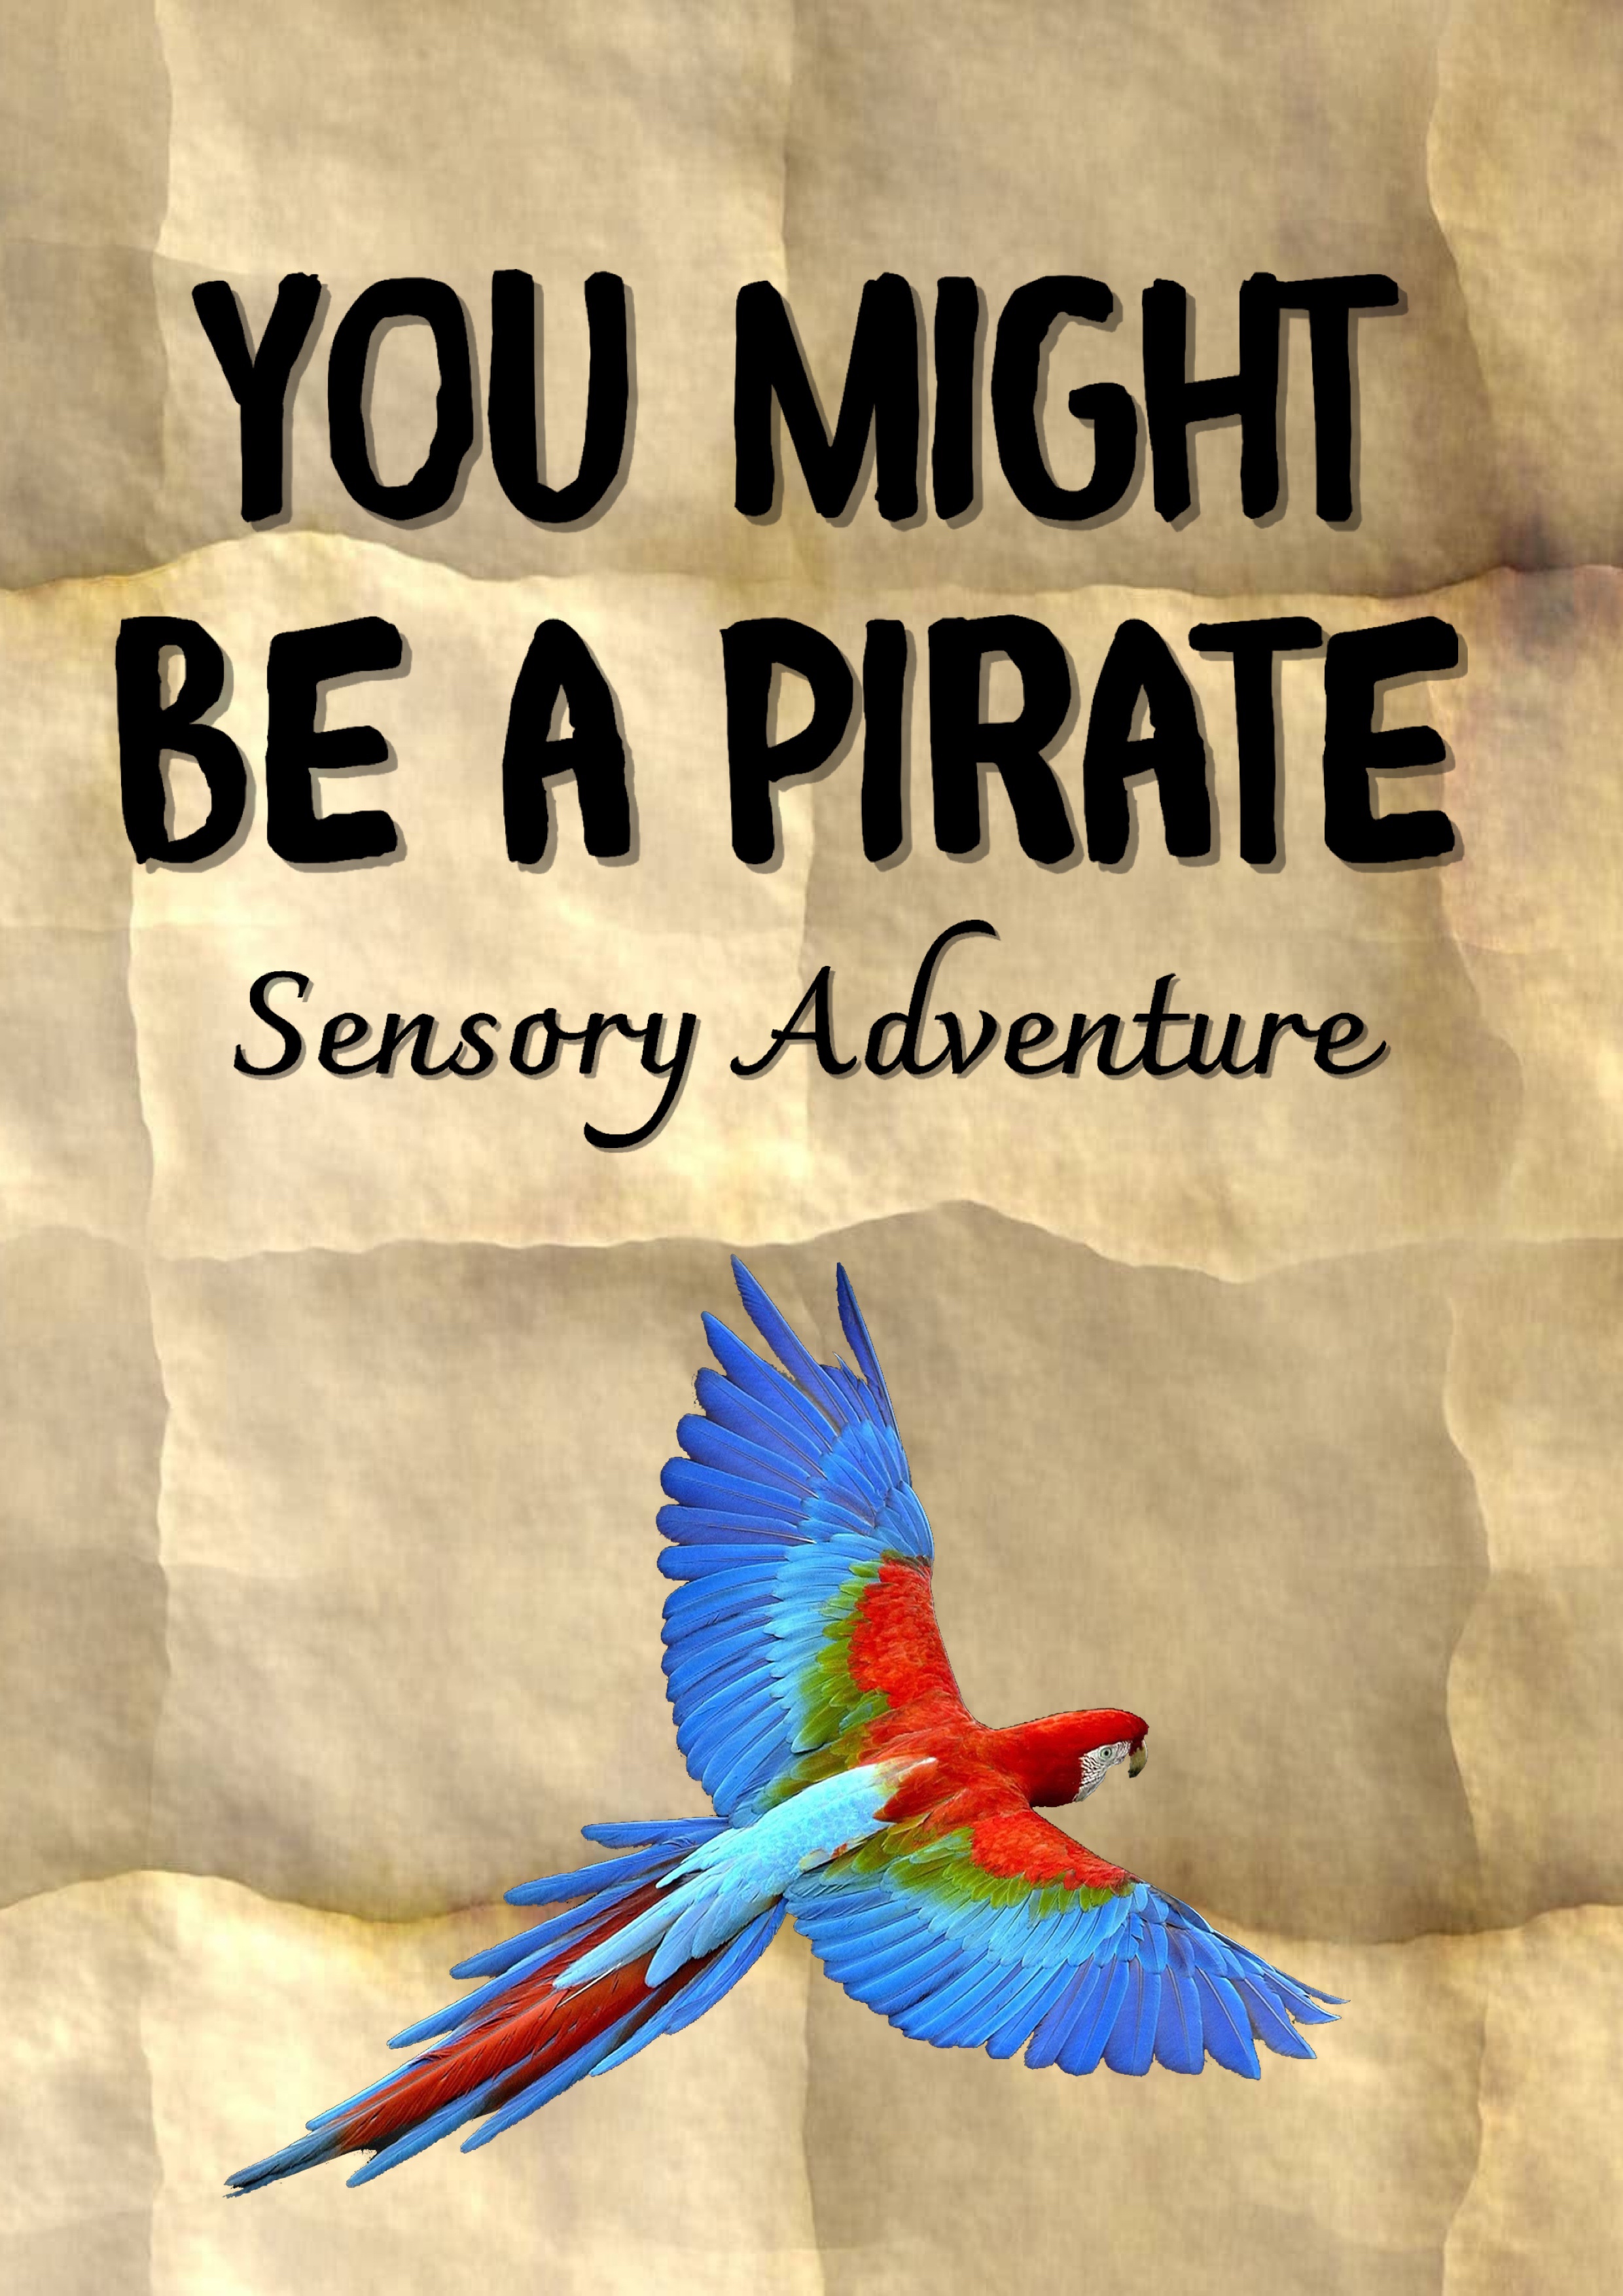 You might be a pirate sensory story